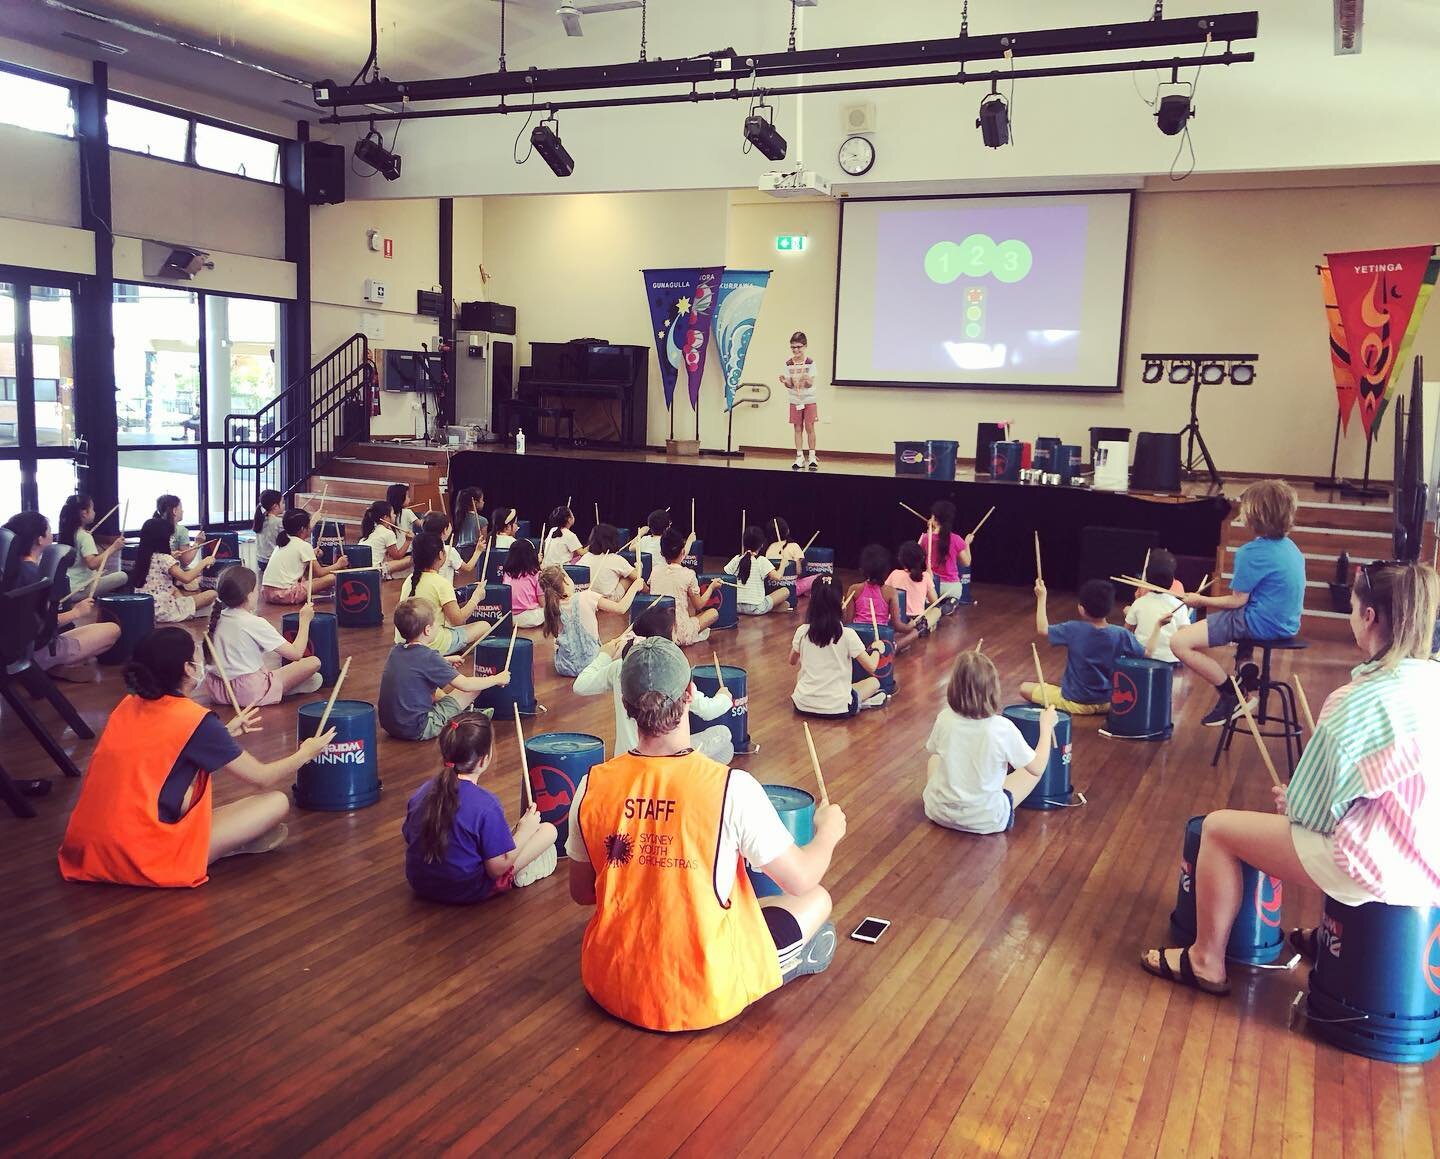 Bucket Drums with the Sydney Youth Orchestra this week! What a great way to kick off the year! 
#bucketdrums #rhythm #drums #incursion 
@bucketdrums